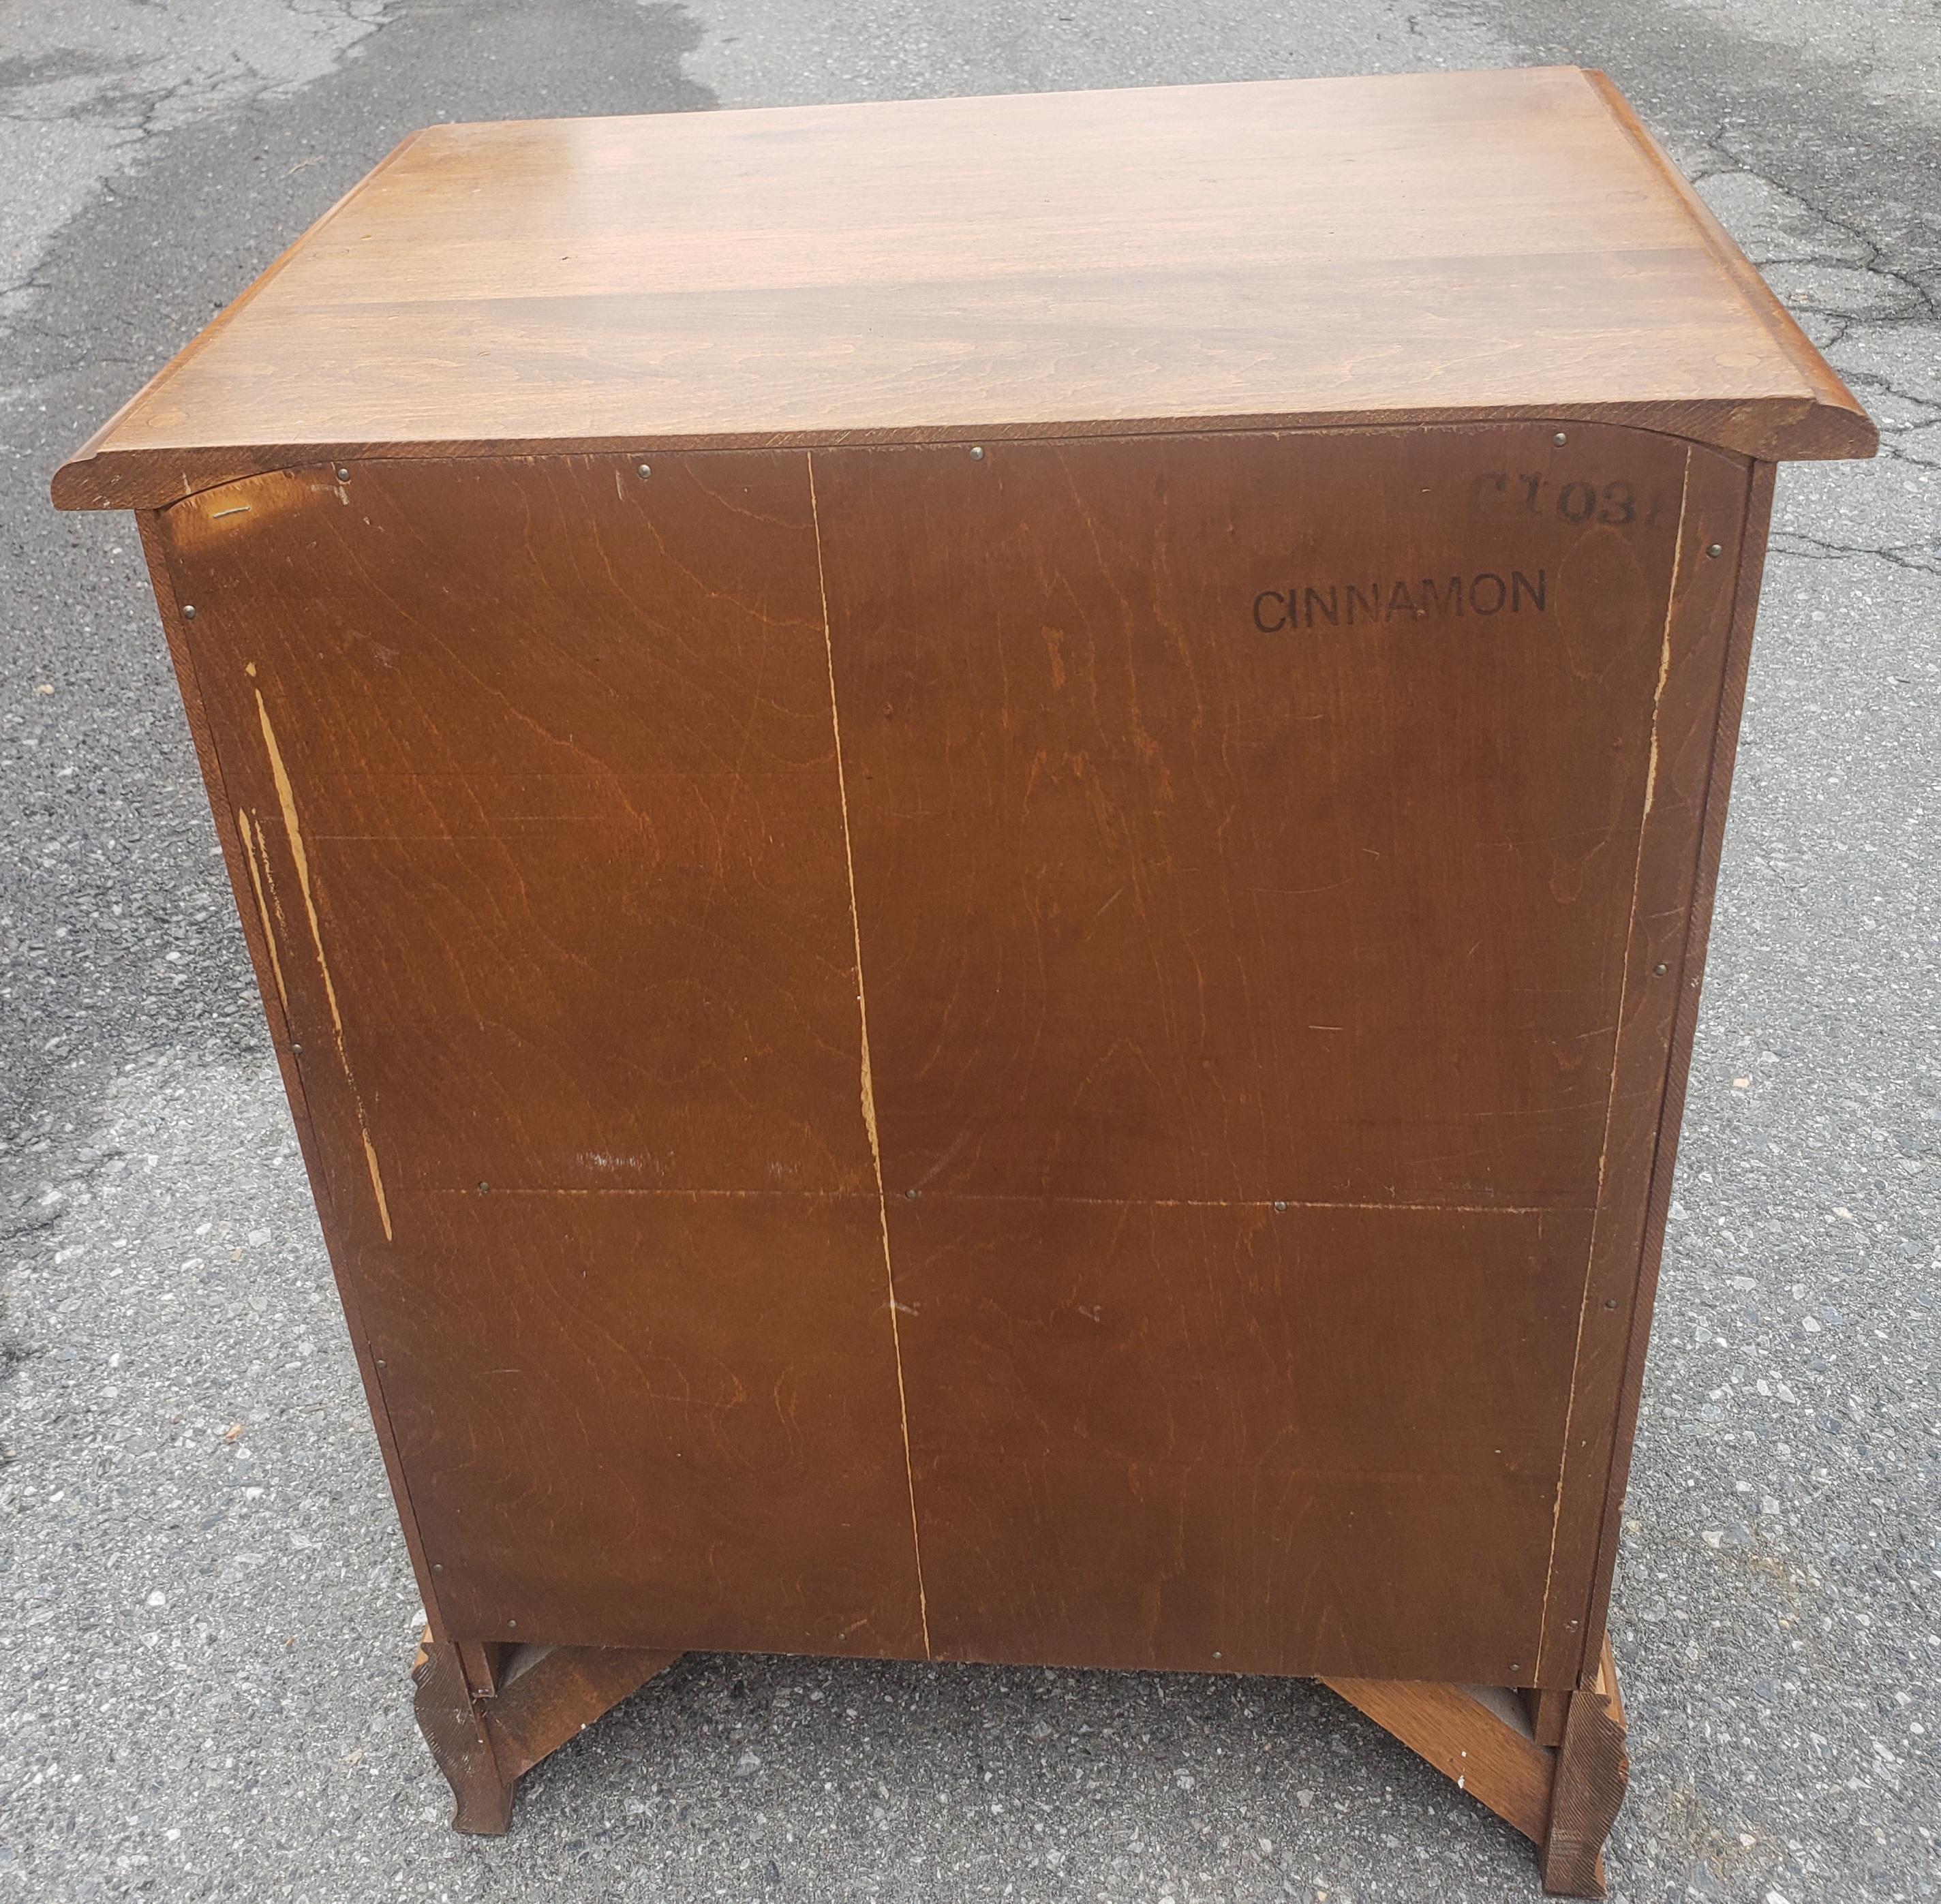 Heywood Wakefield Two-Tier Two-Drawer Cinnamon Bedside Table In Excellent Condition For Sale In Germantown, MD